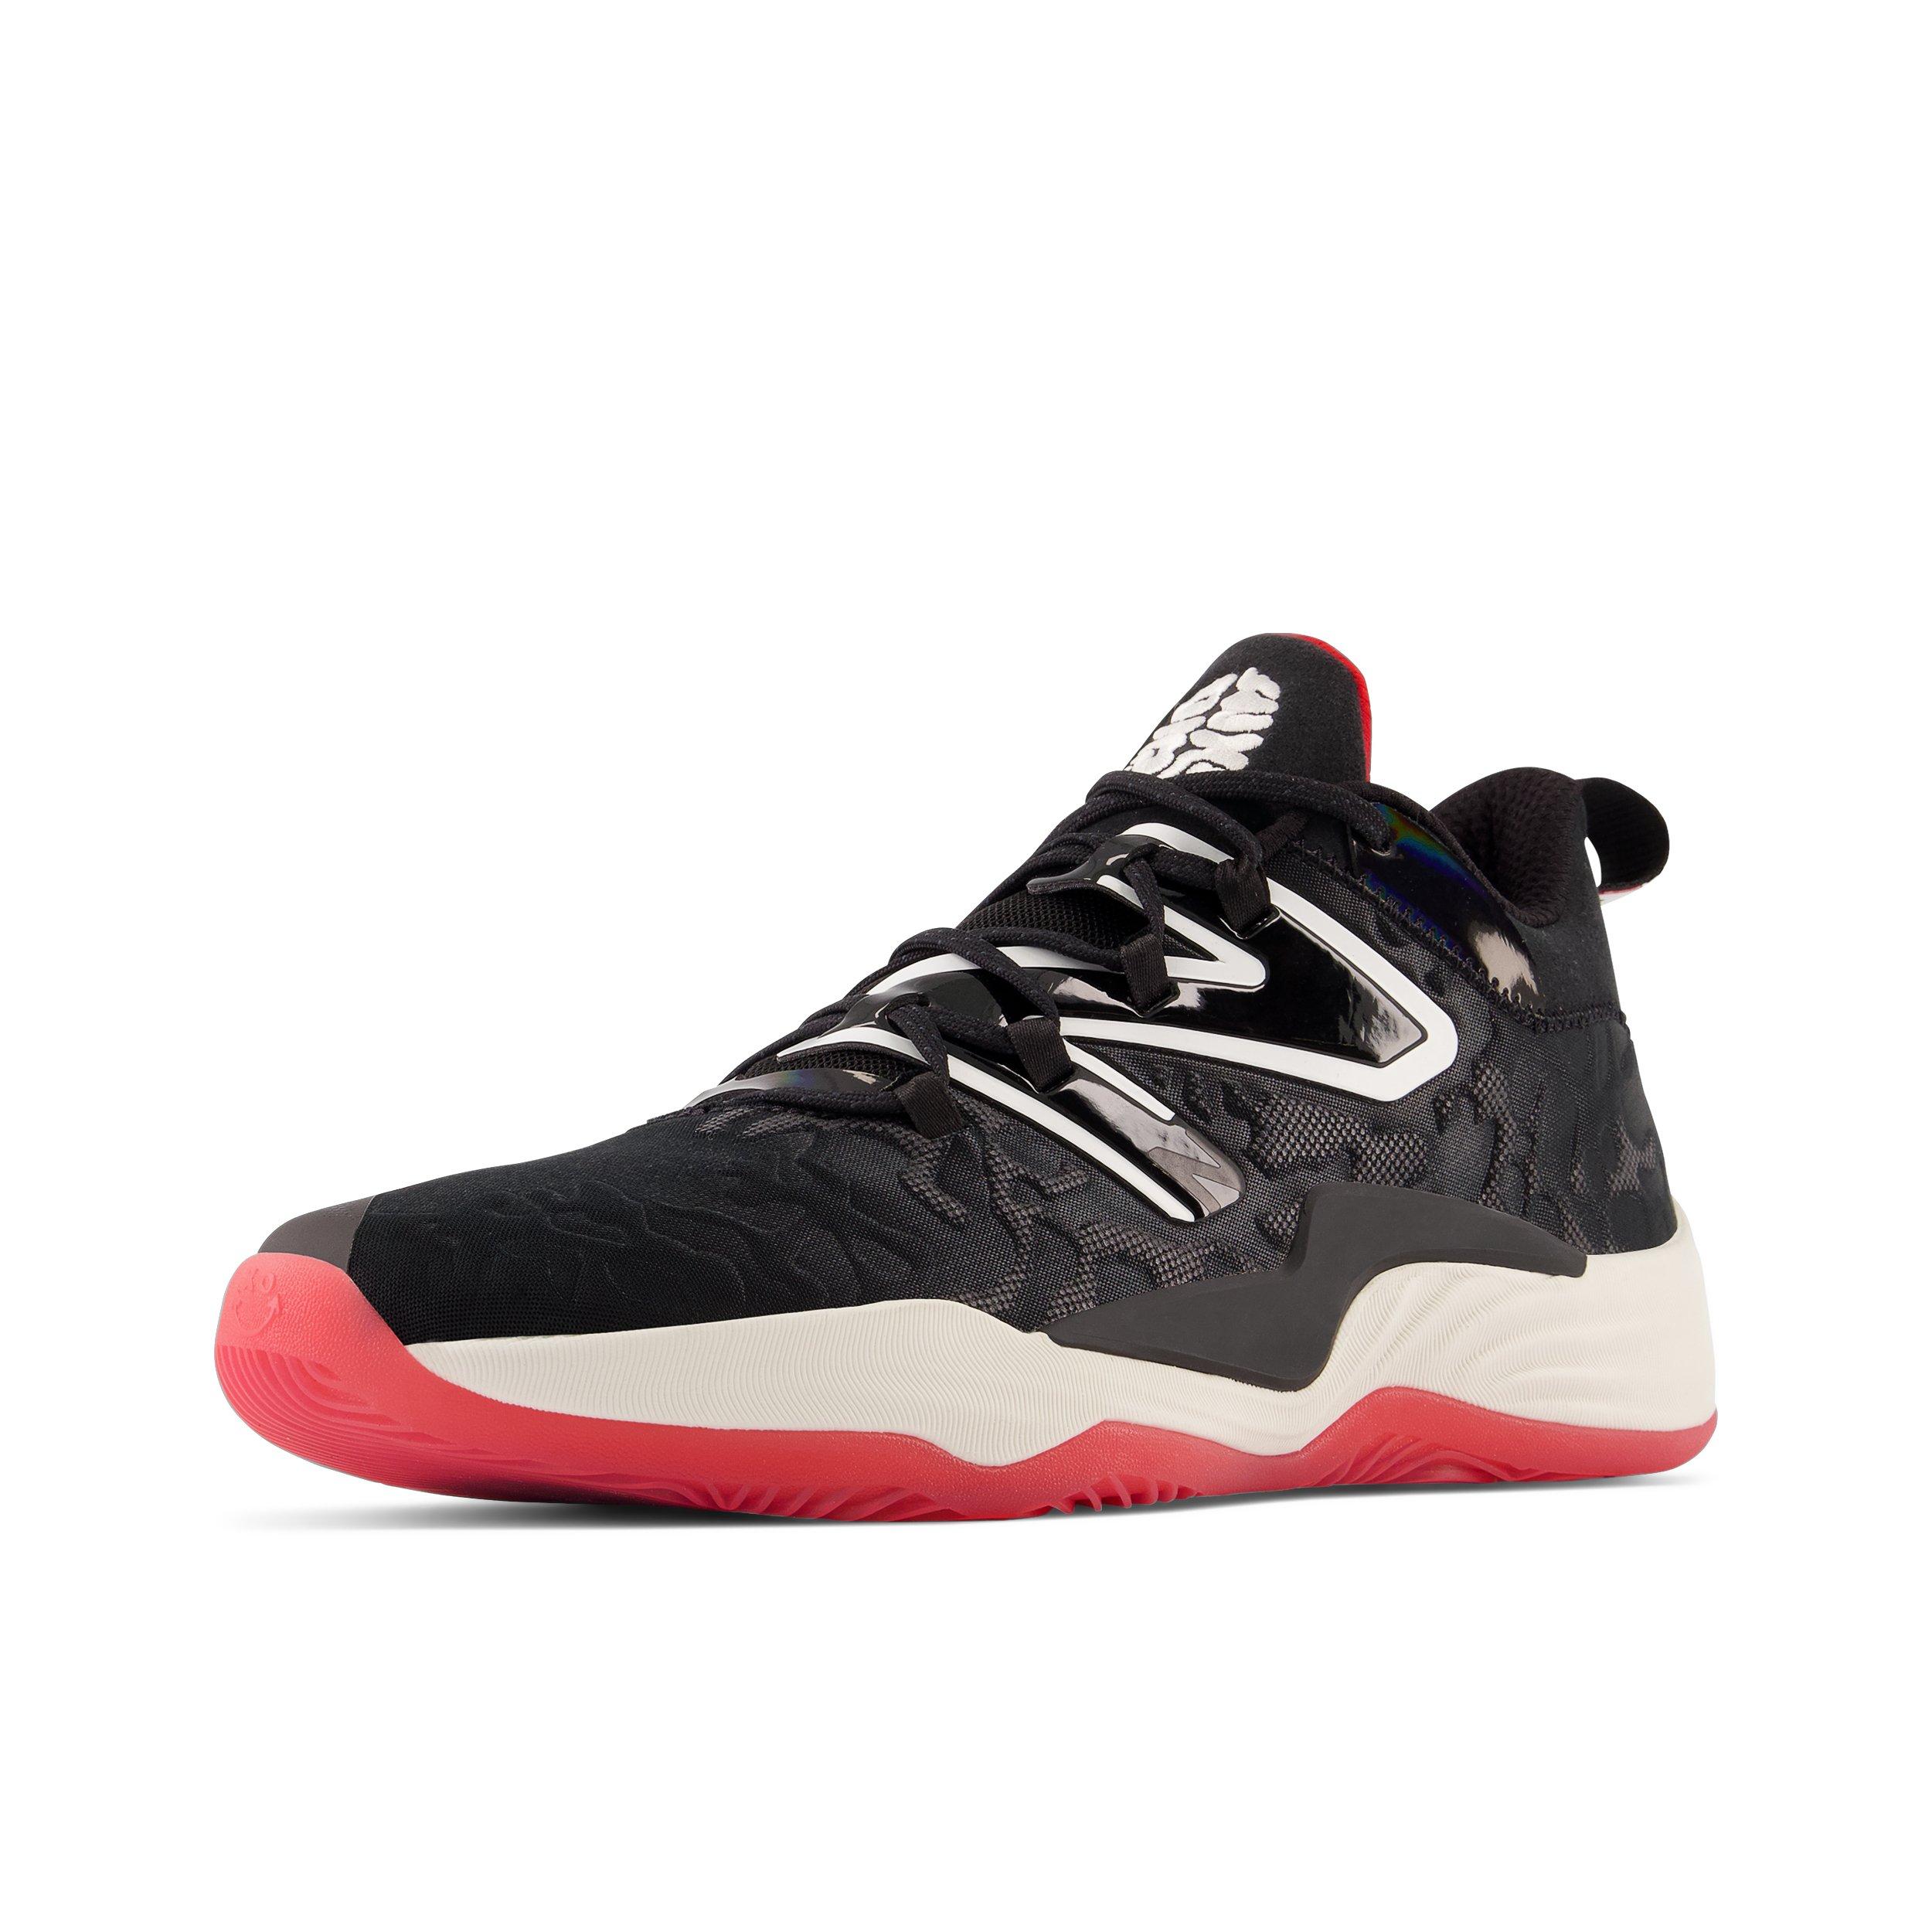 New Balance TWO WXY v3 'Windy City' Images & Details - Sports